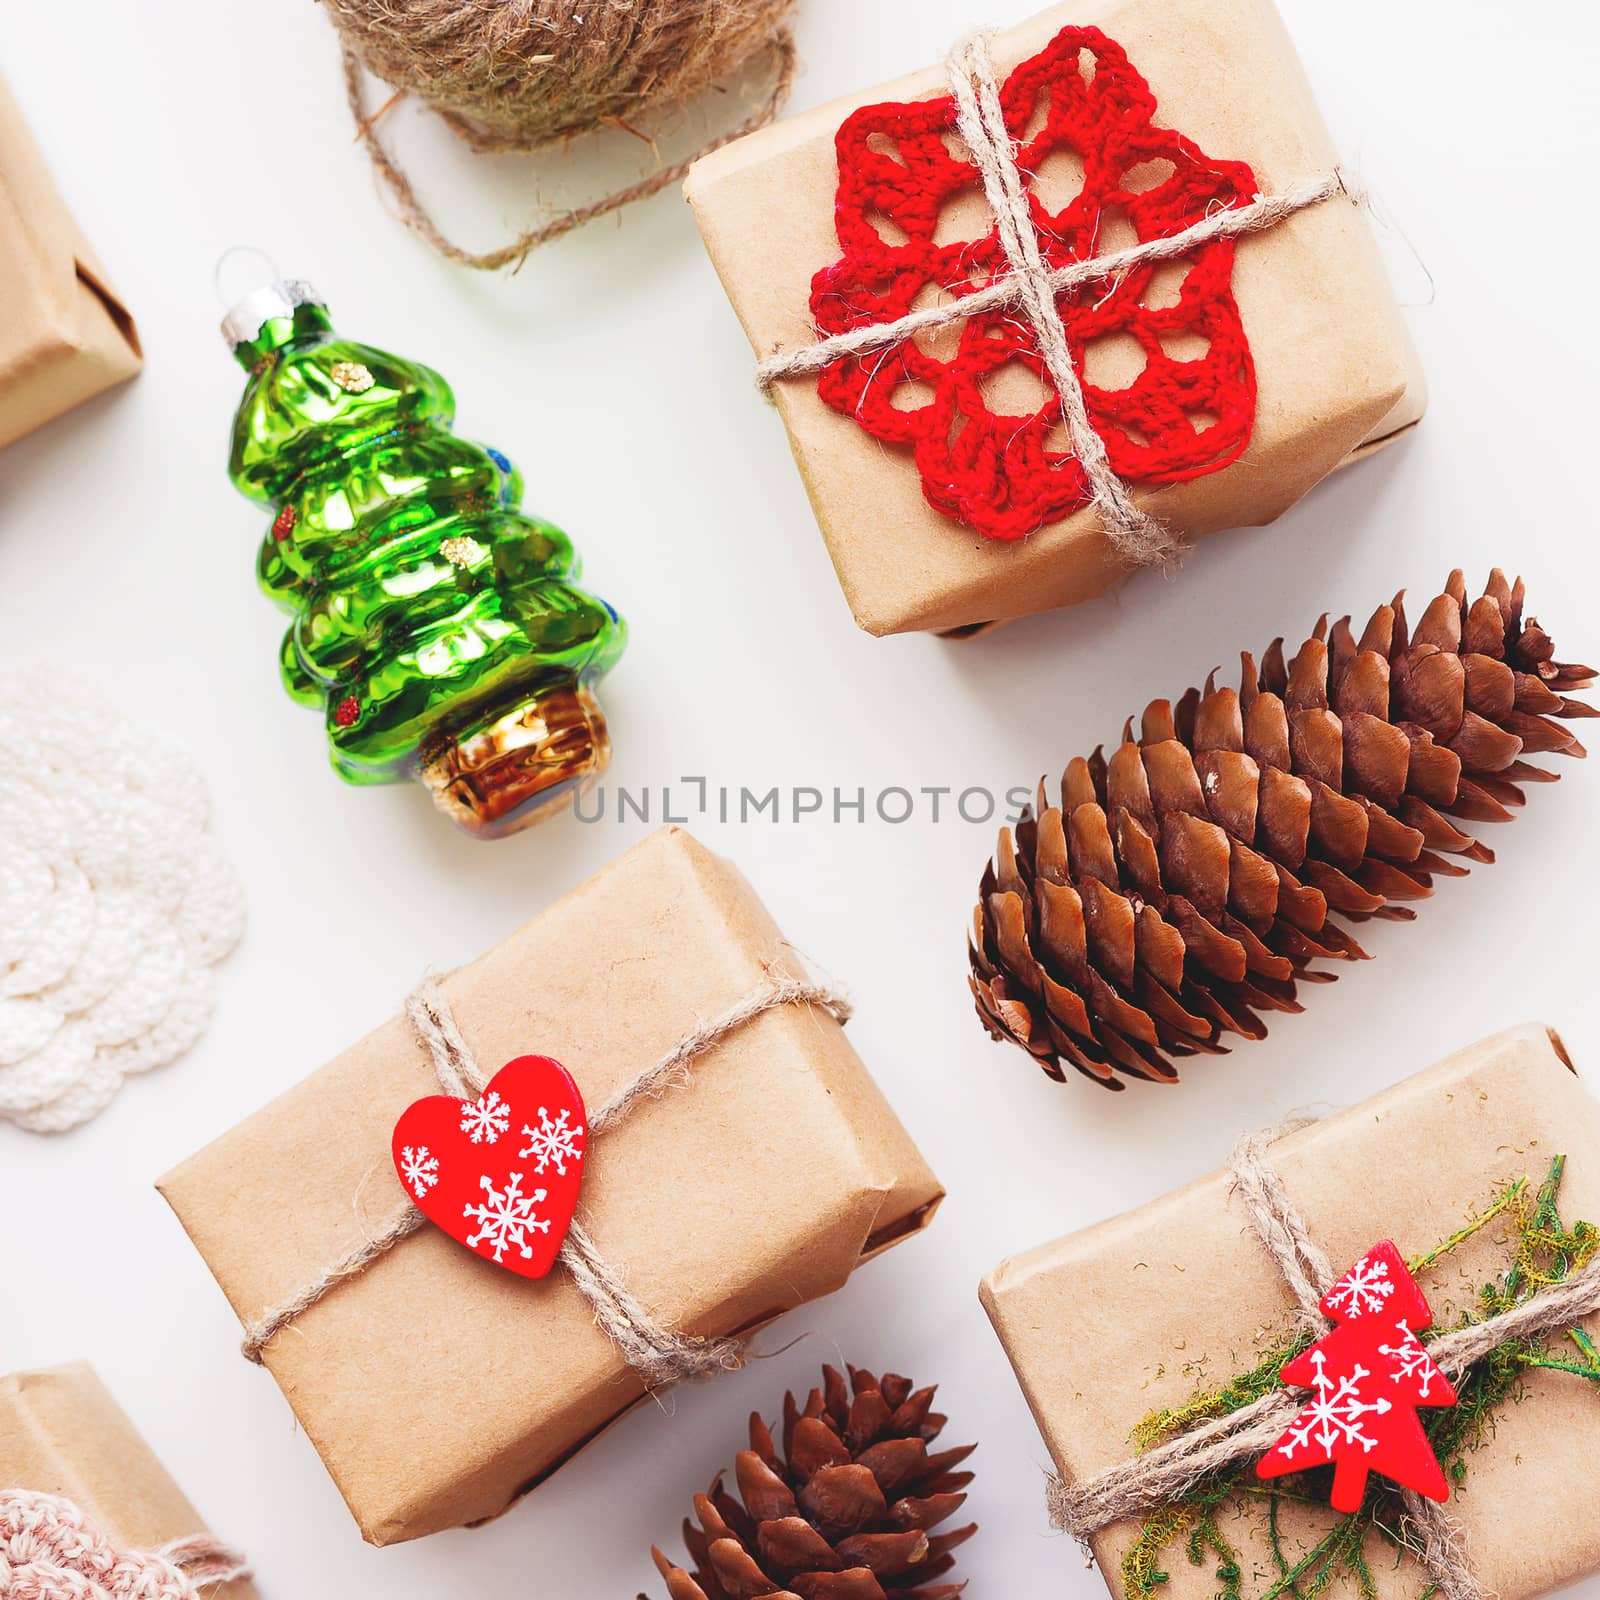 Christmas and New Year background with handmade presents wrapped in craft paper and decorations, holiday symbols.